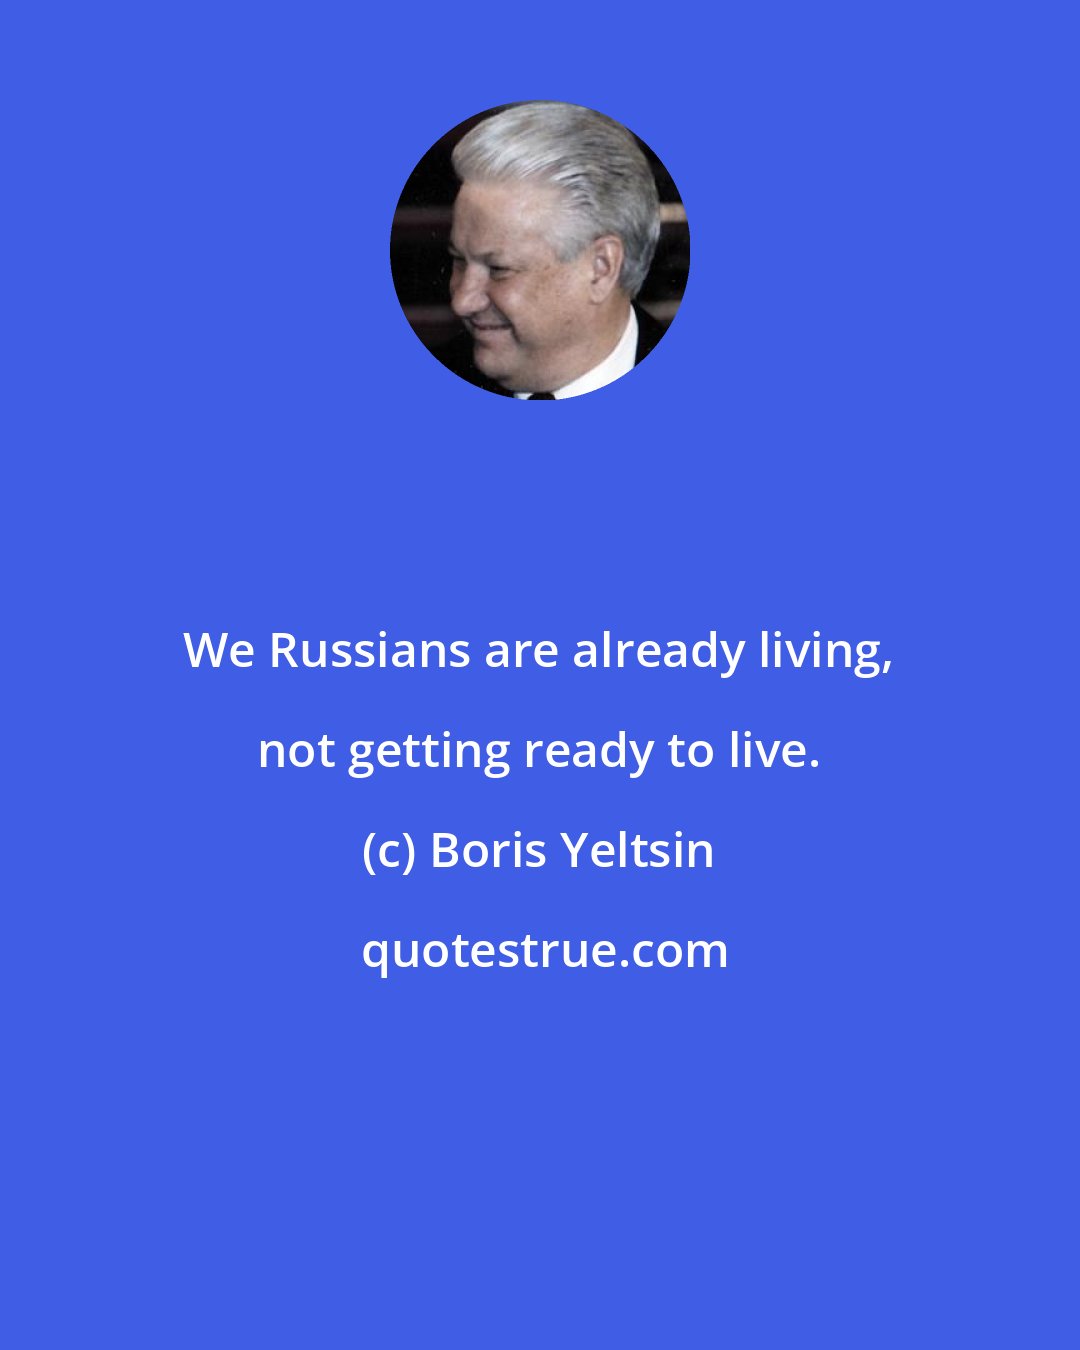 Boris Yeltsin: We Russians are already living, not getting ready to live.